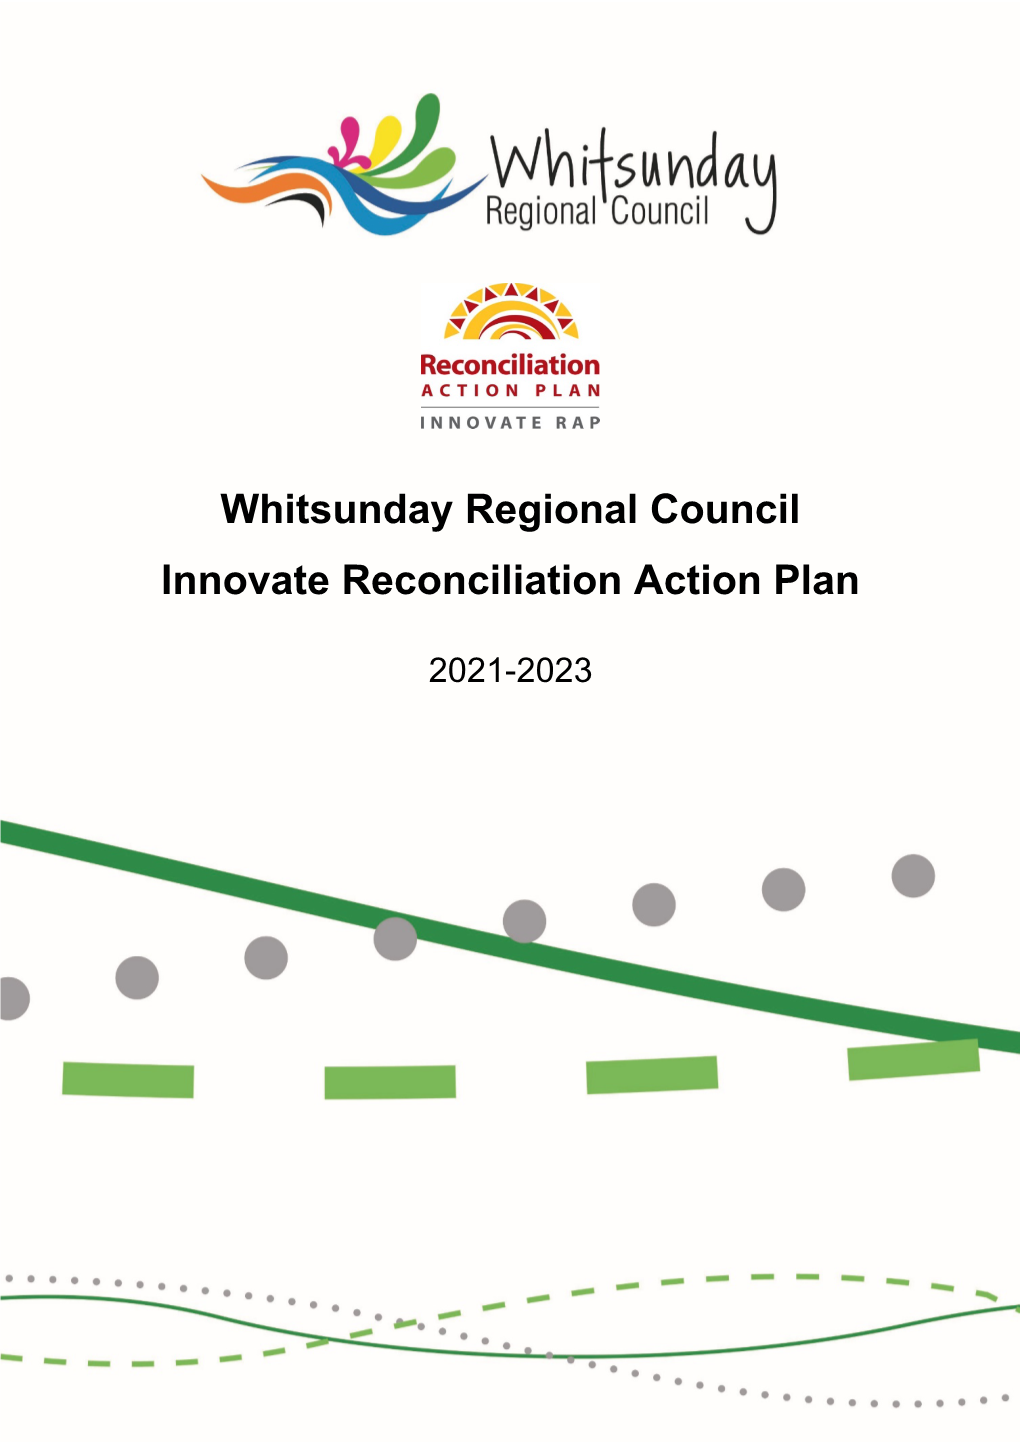 Whitsunday Regional Council Innovate Reconciliation Action Plan